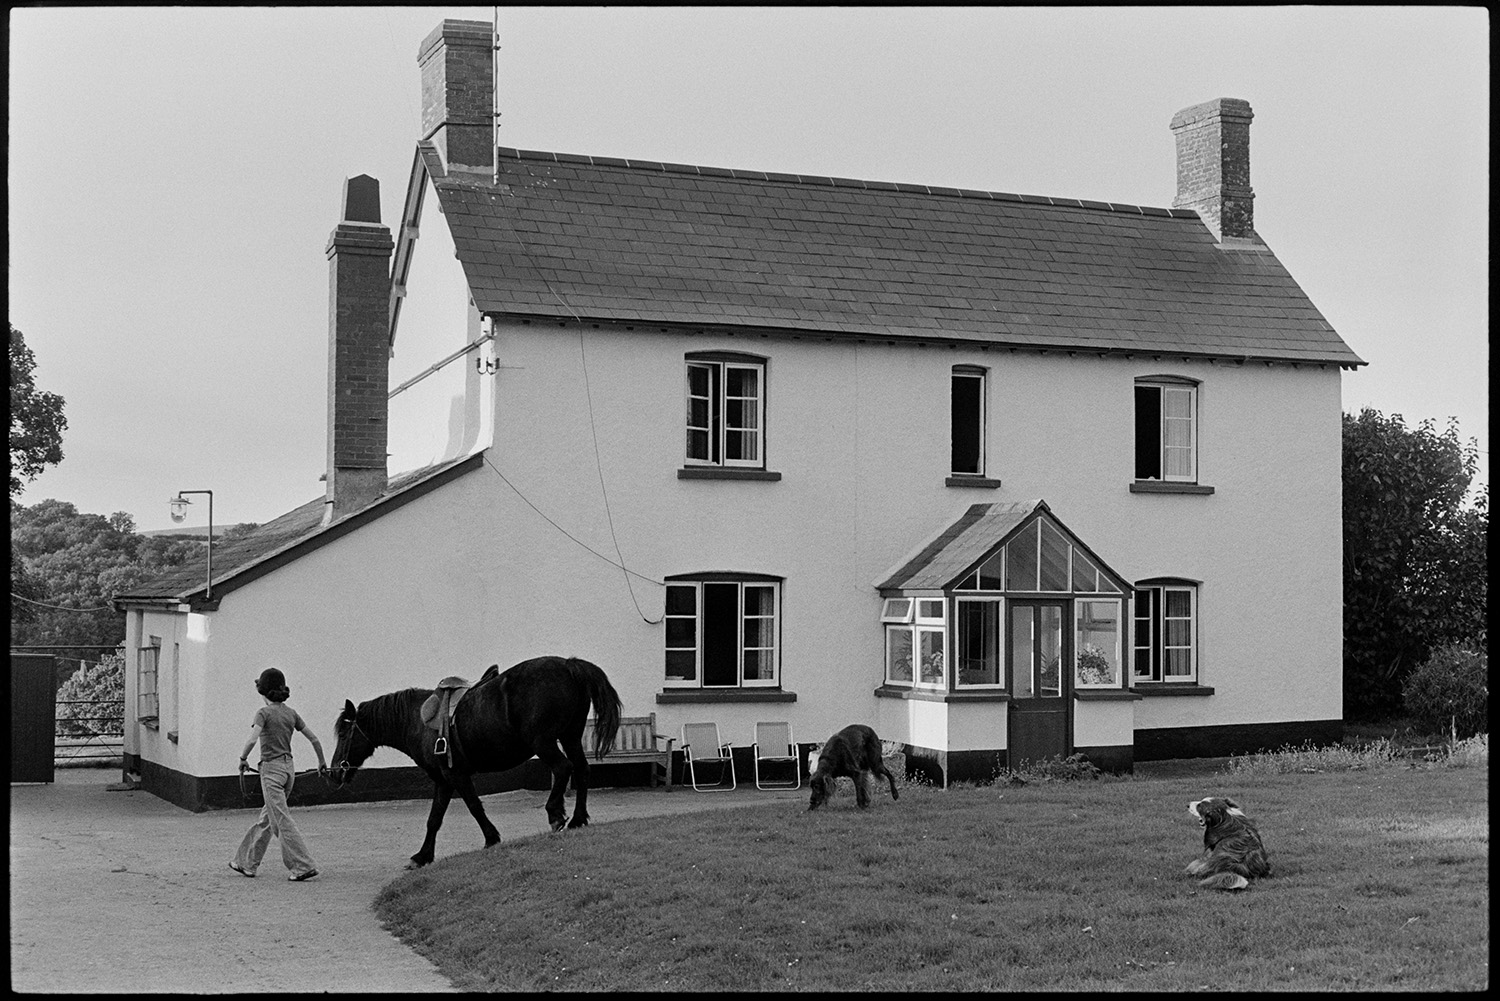 Pony in front of farmhouse and setting off.
[Elizabeth Ward leading her pony in front of the farmhouse at Parsonage, Iddesleigh. Two dogs are on the lawn in front of the house.]